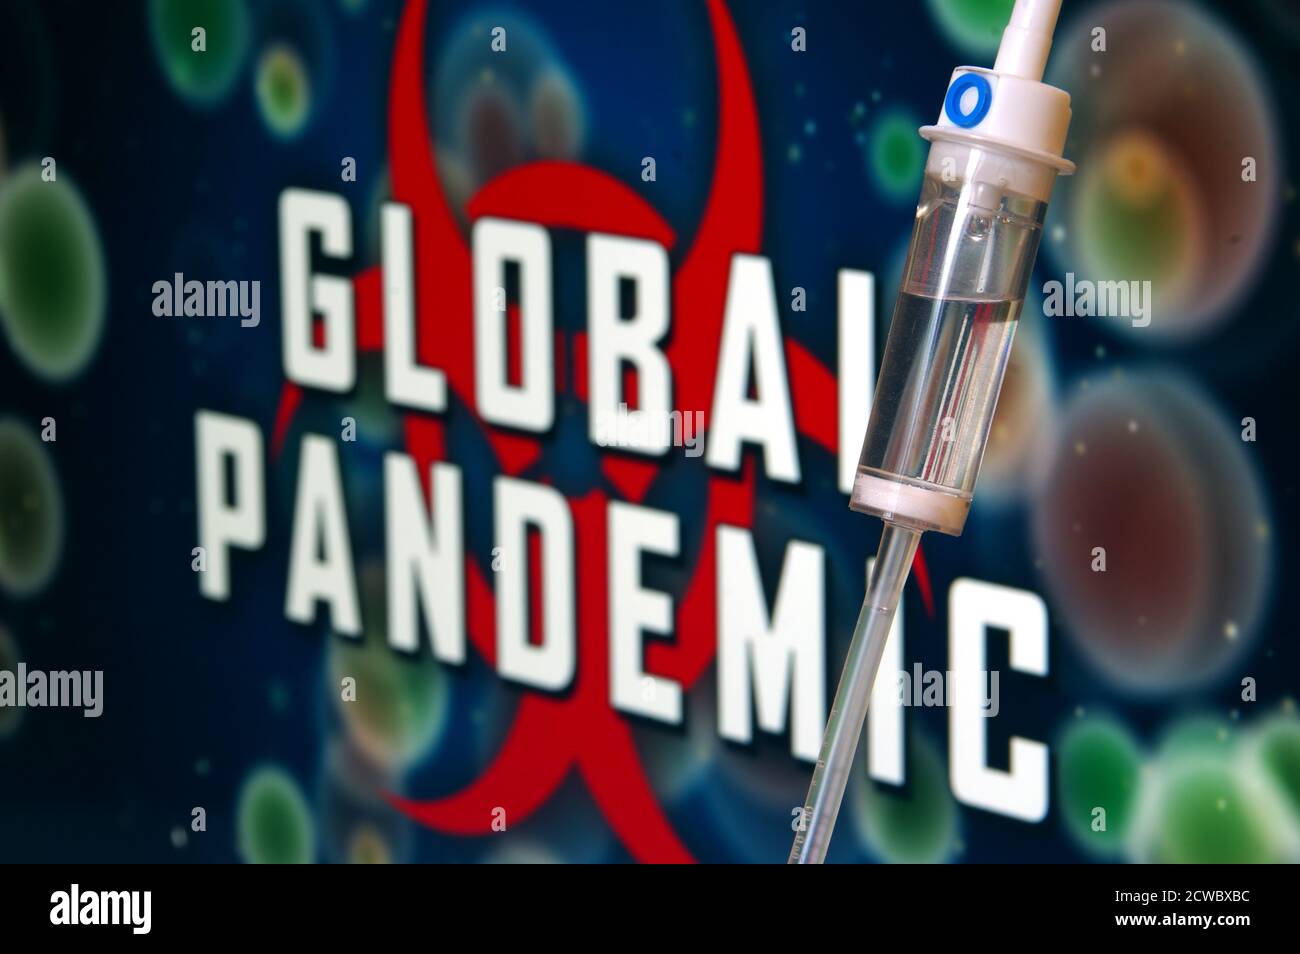 Epidemic Covid-19 crisis. A drip with pandemic symbol on a background illustration. Health, medical and coronavirus concept. Stock Photo